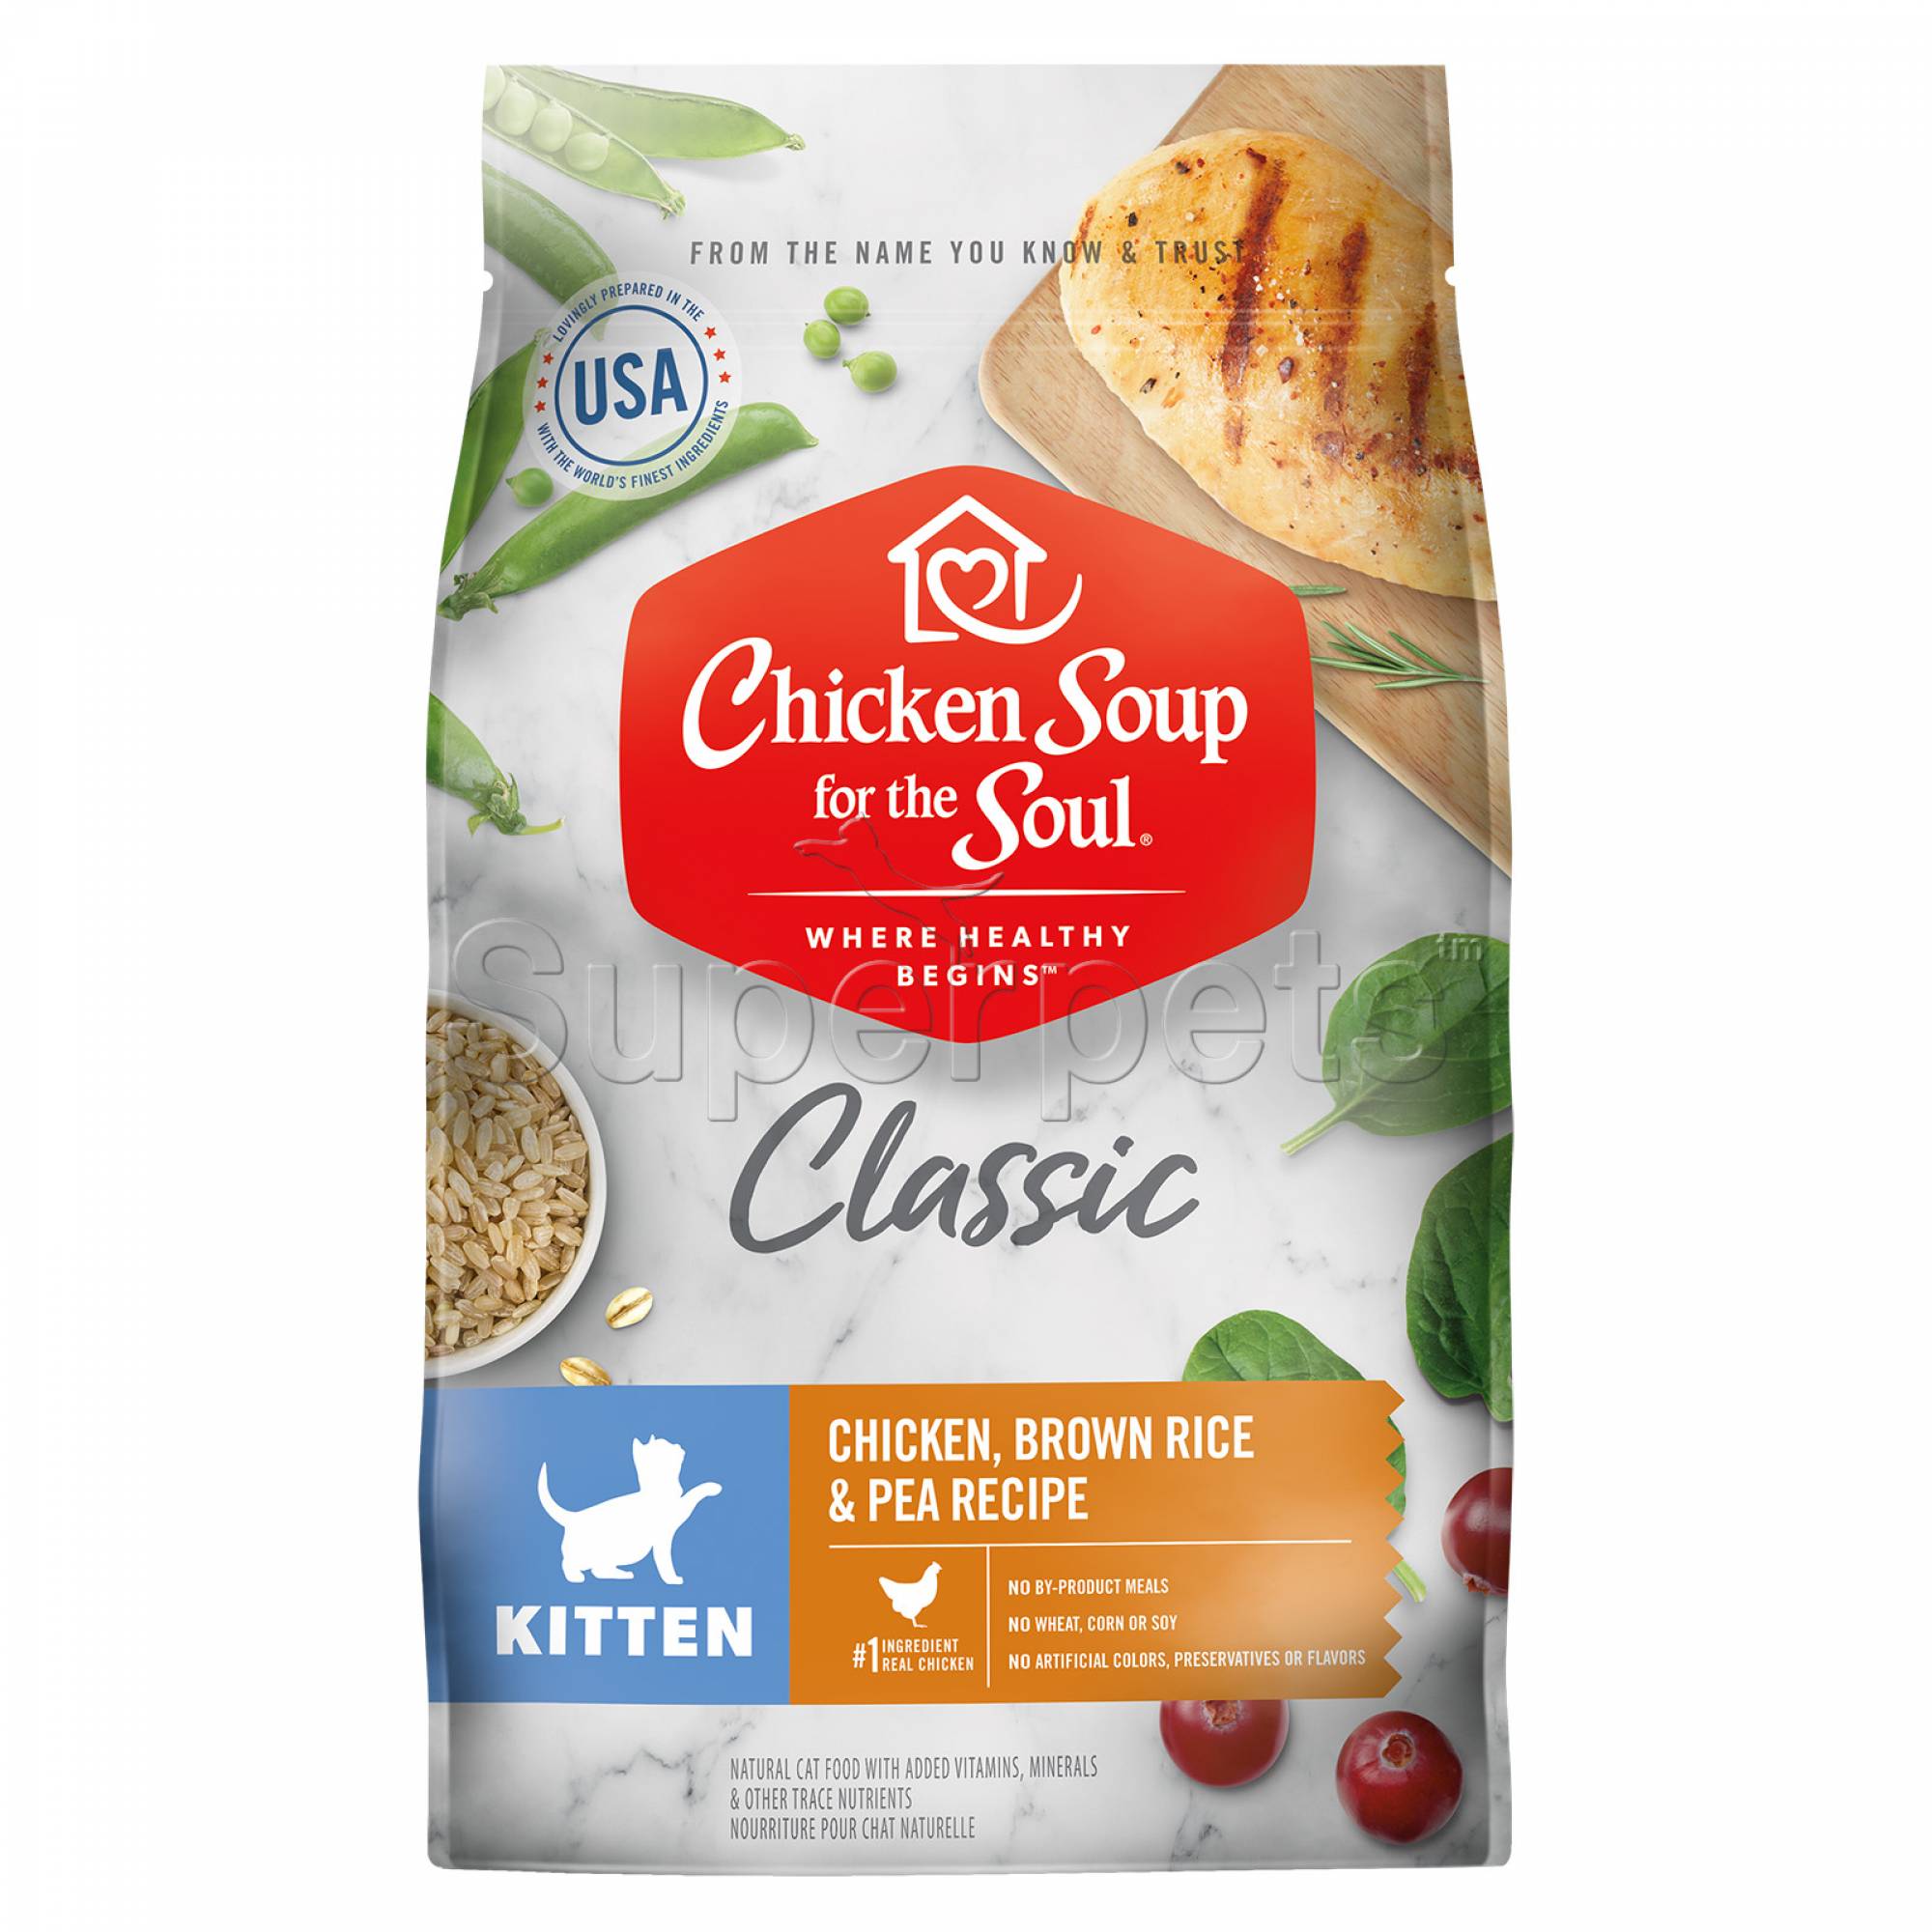 Chicken Soup for the Soul Cat Dry Classic Kitten Chicken, Brown Rice & Pea Recipe 4.5lb